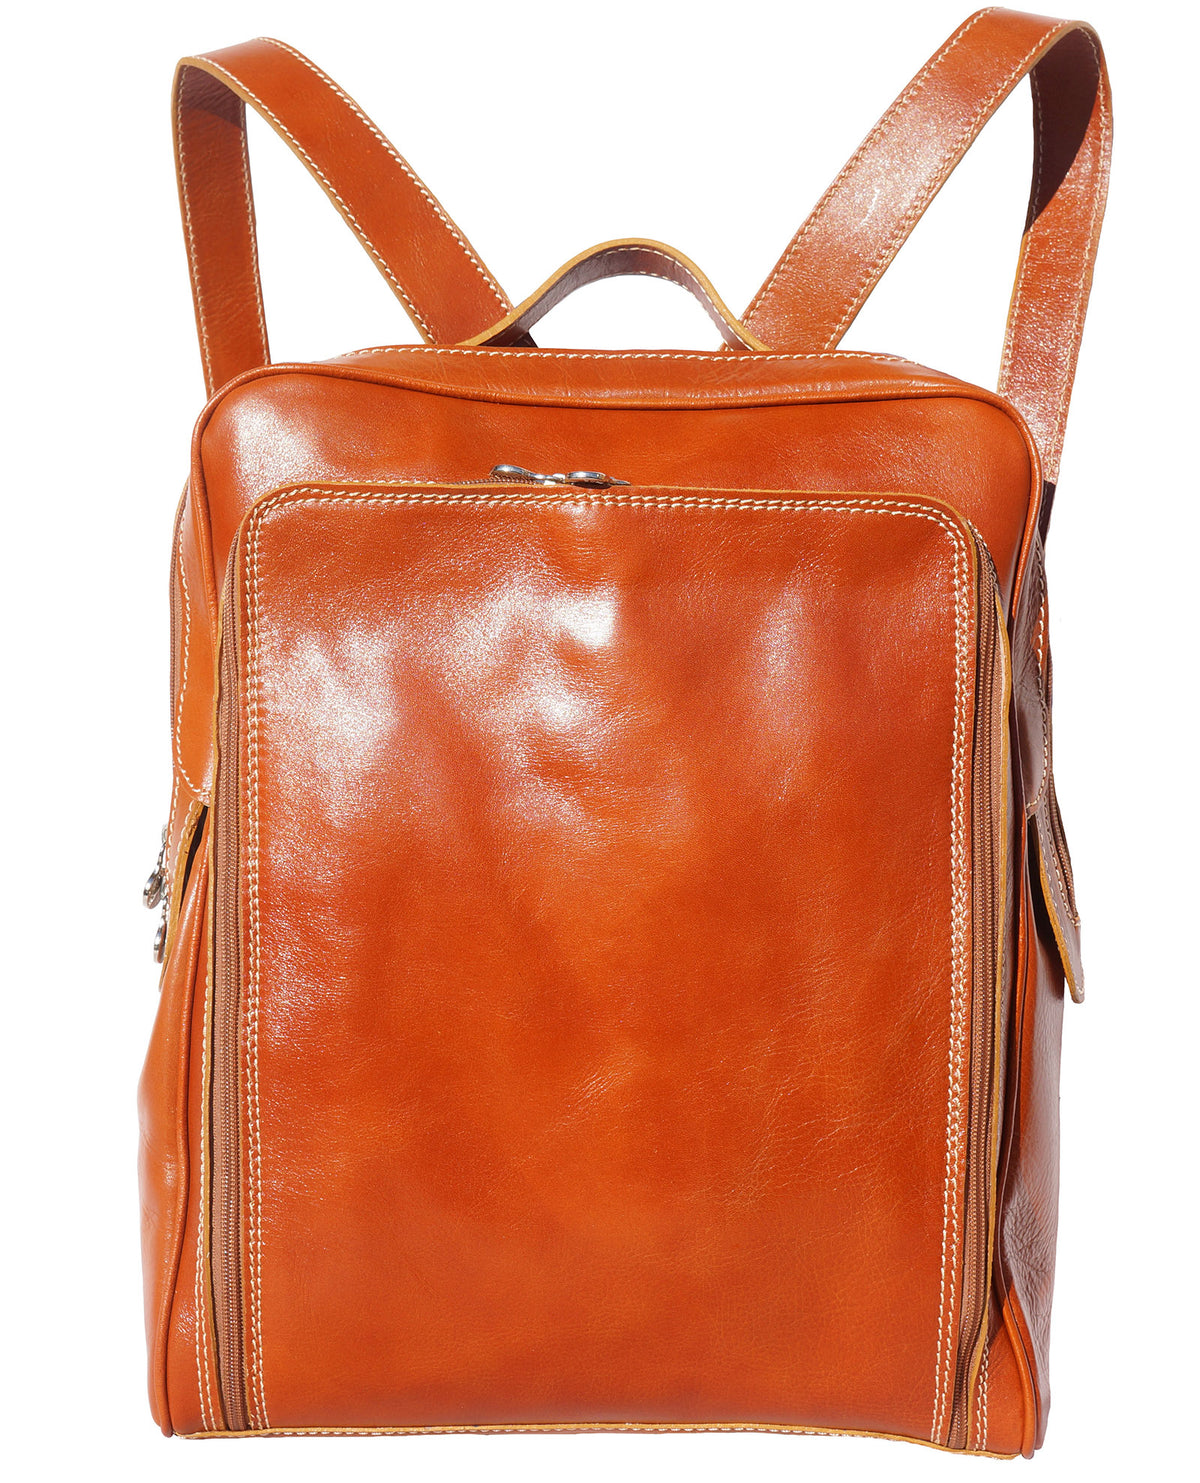  Gabriele GM Tan Leather Backpack Purse - front view